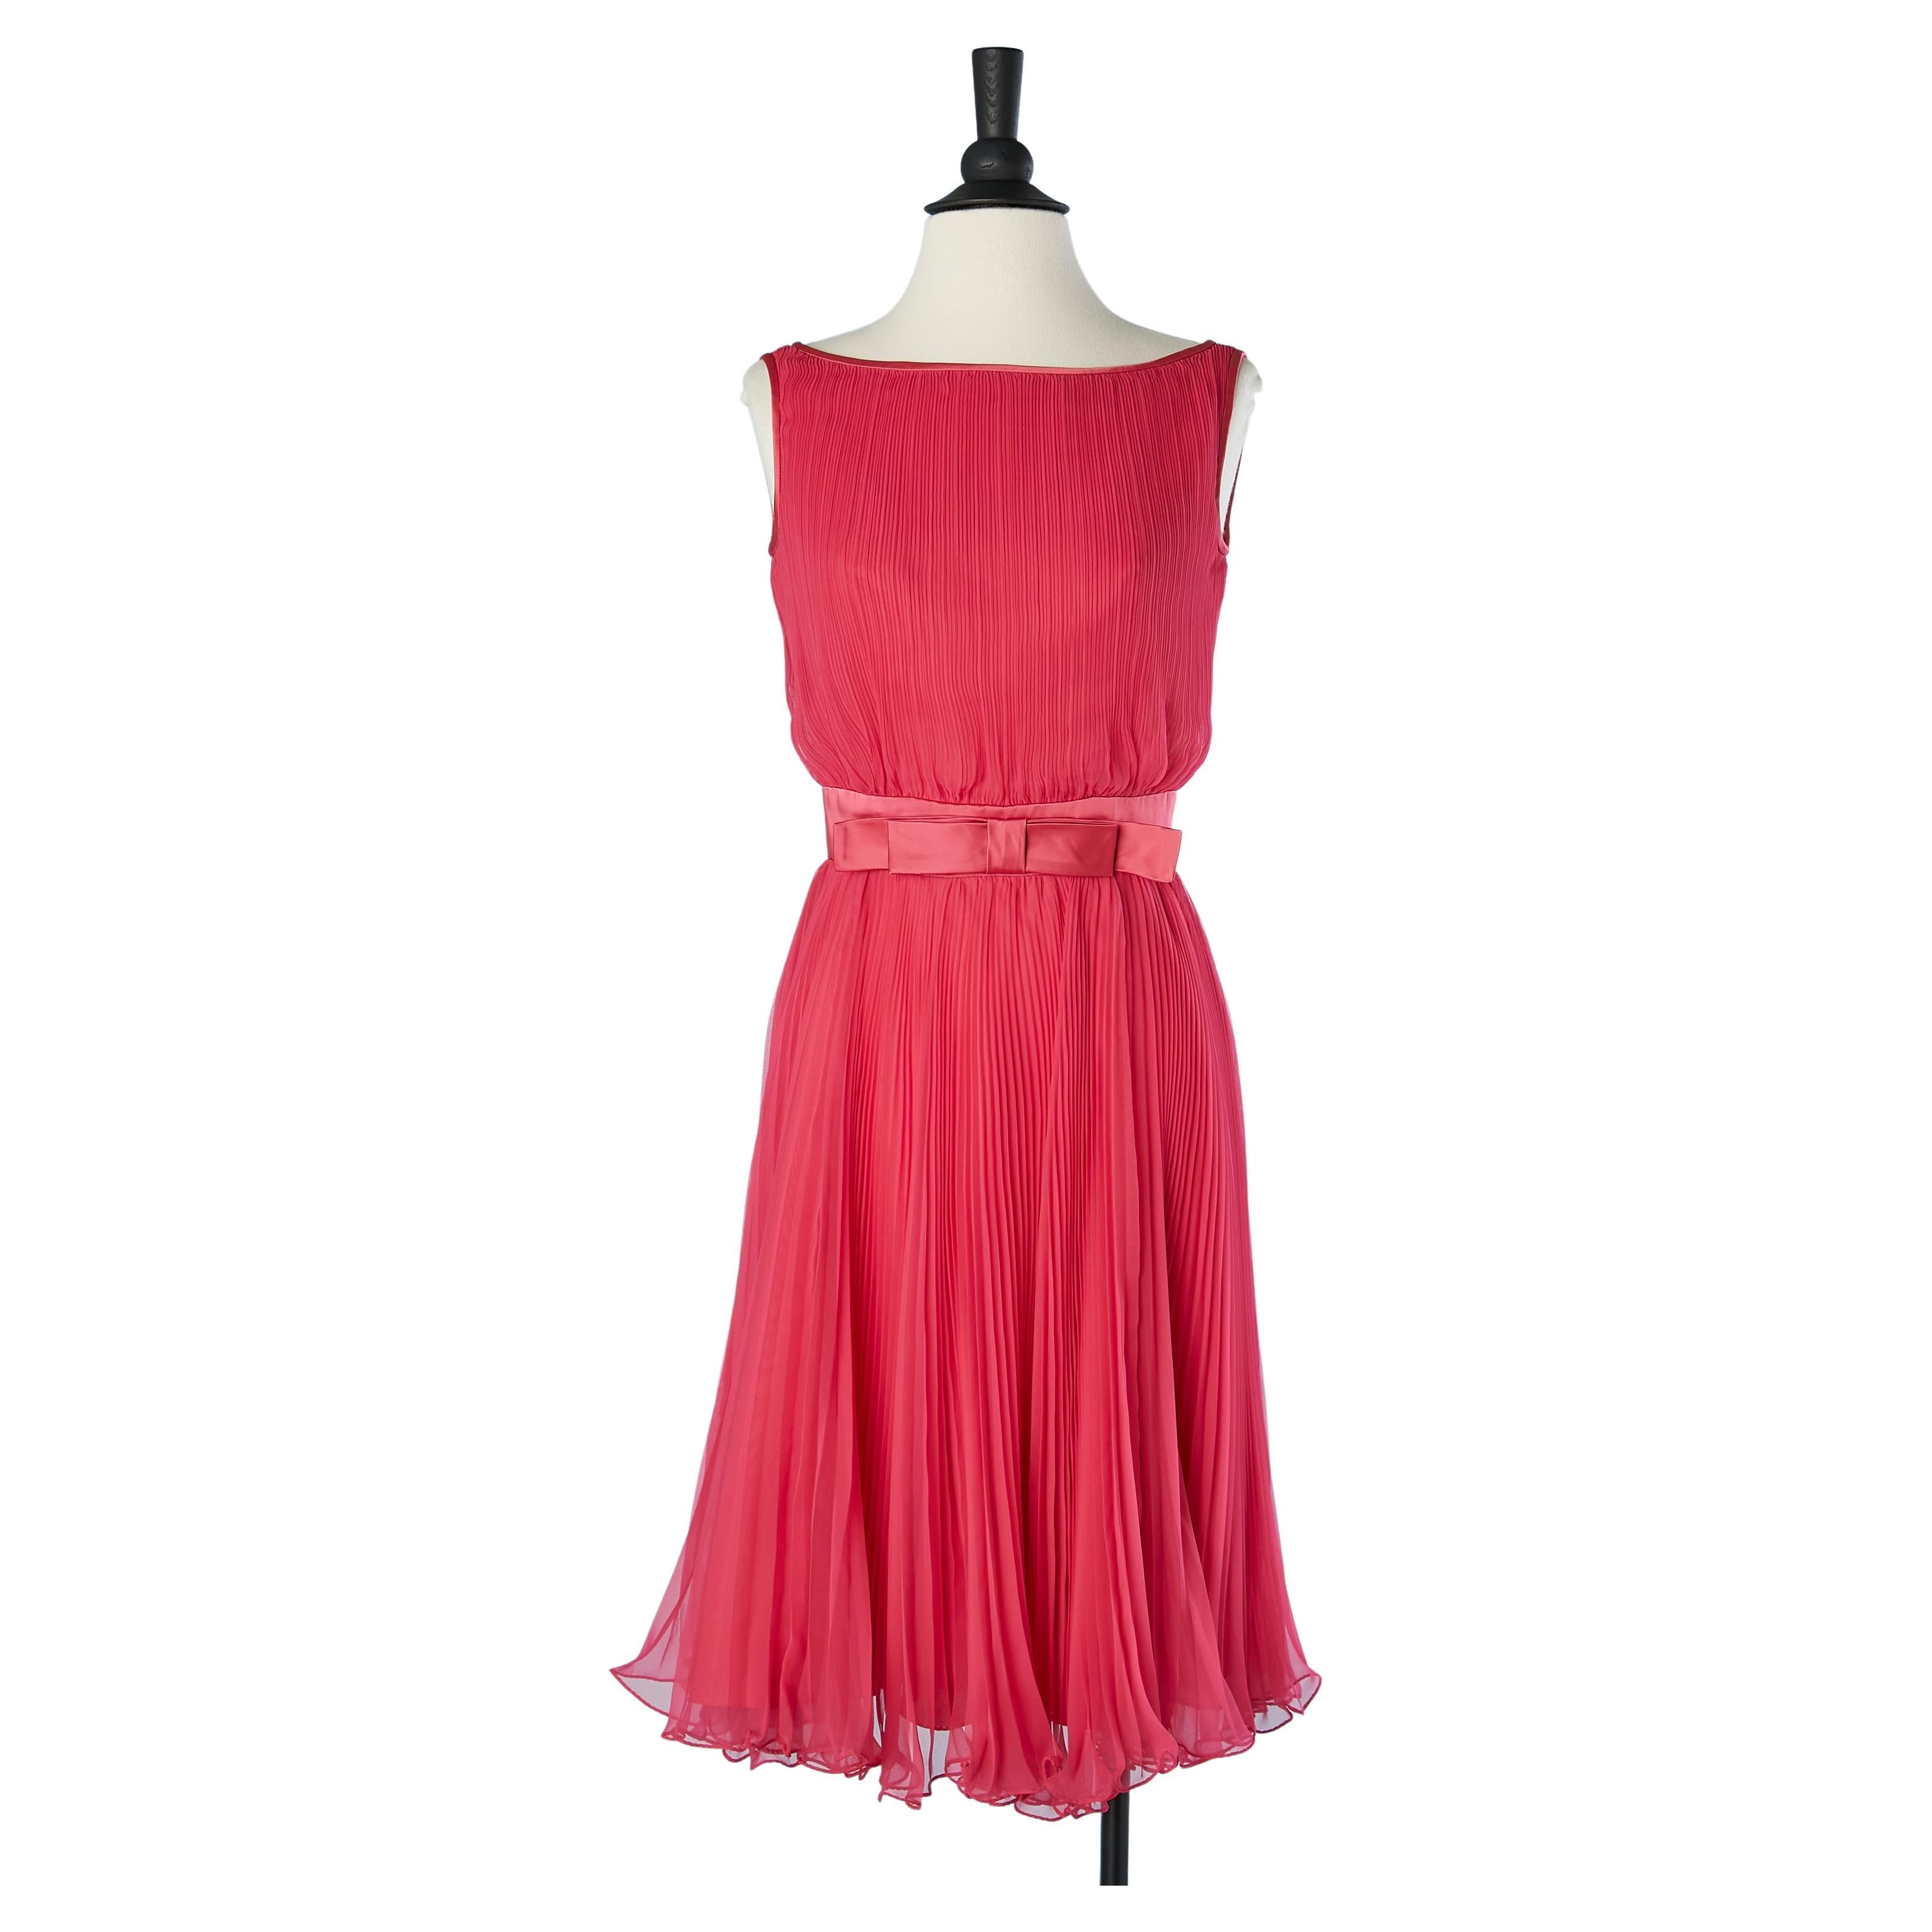 Sunray pleated pink cocktail dress with bow  Miss Eliette Circa 1960's 